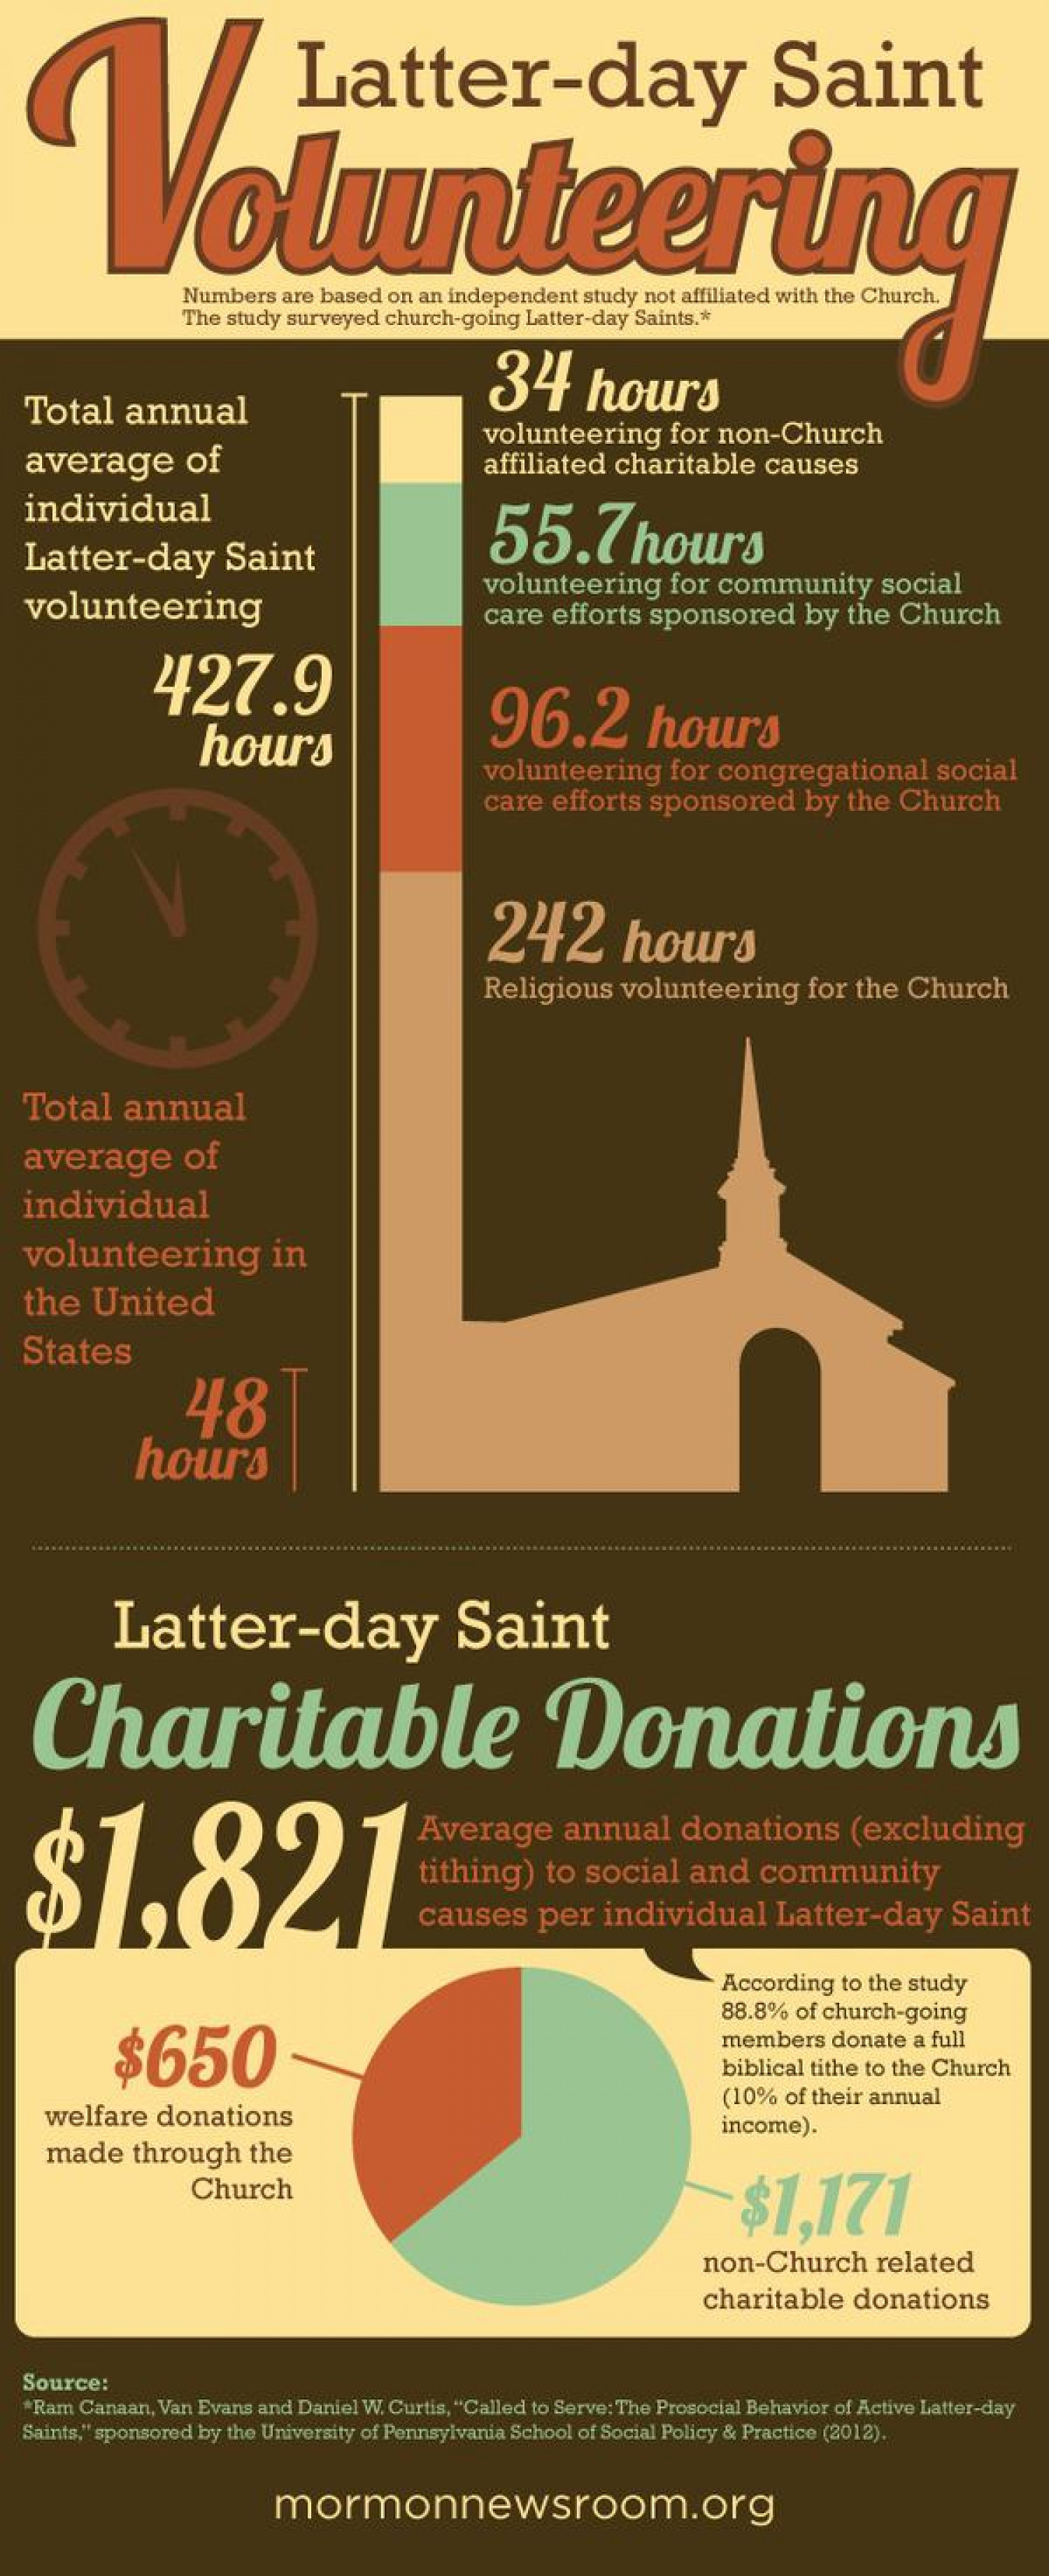 Mormon Volunteerism Highlighted in New Study Infographic